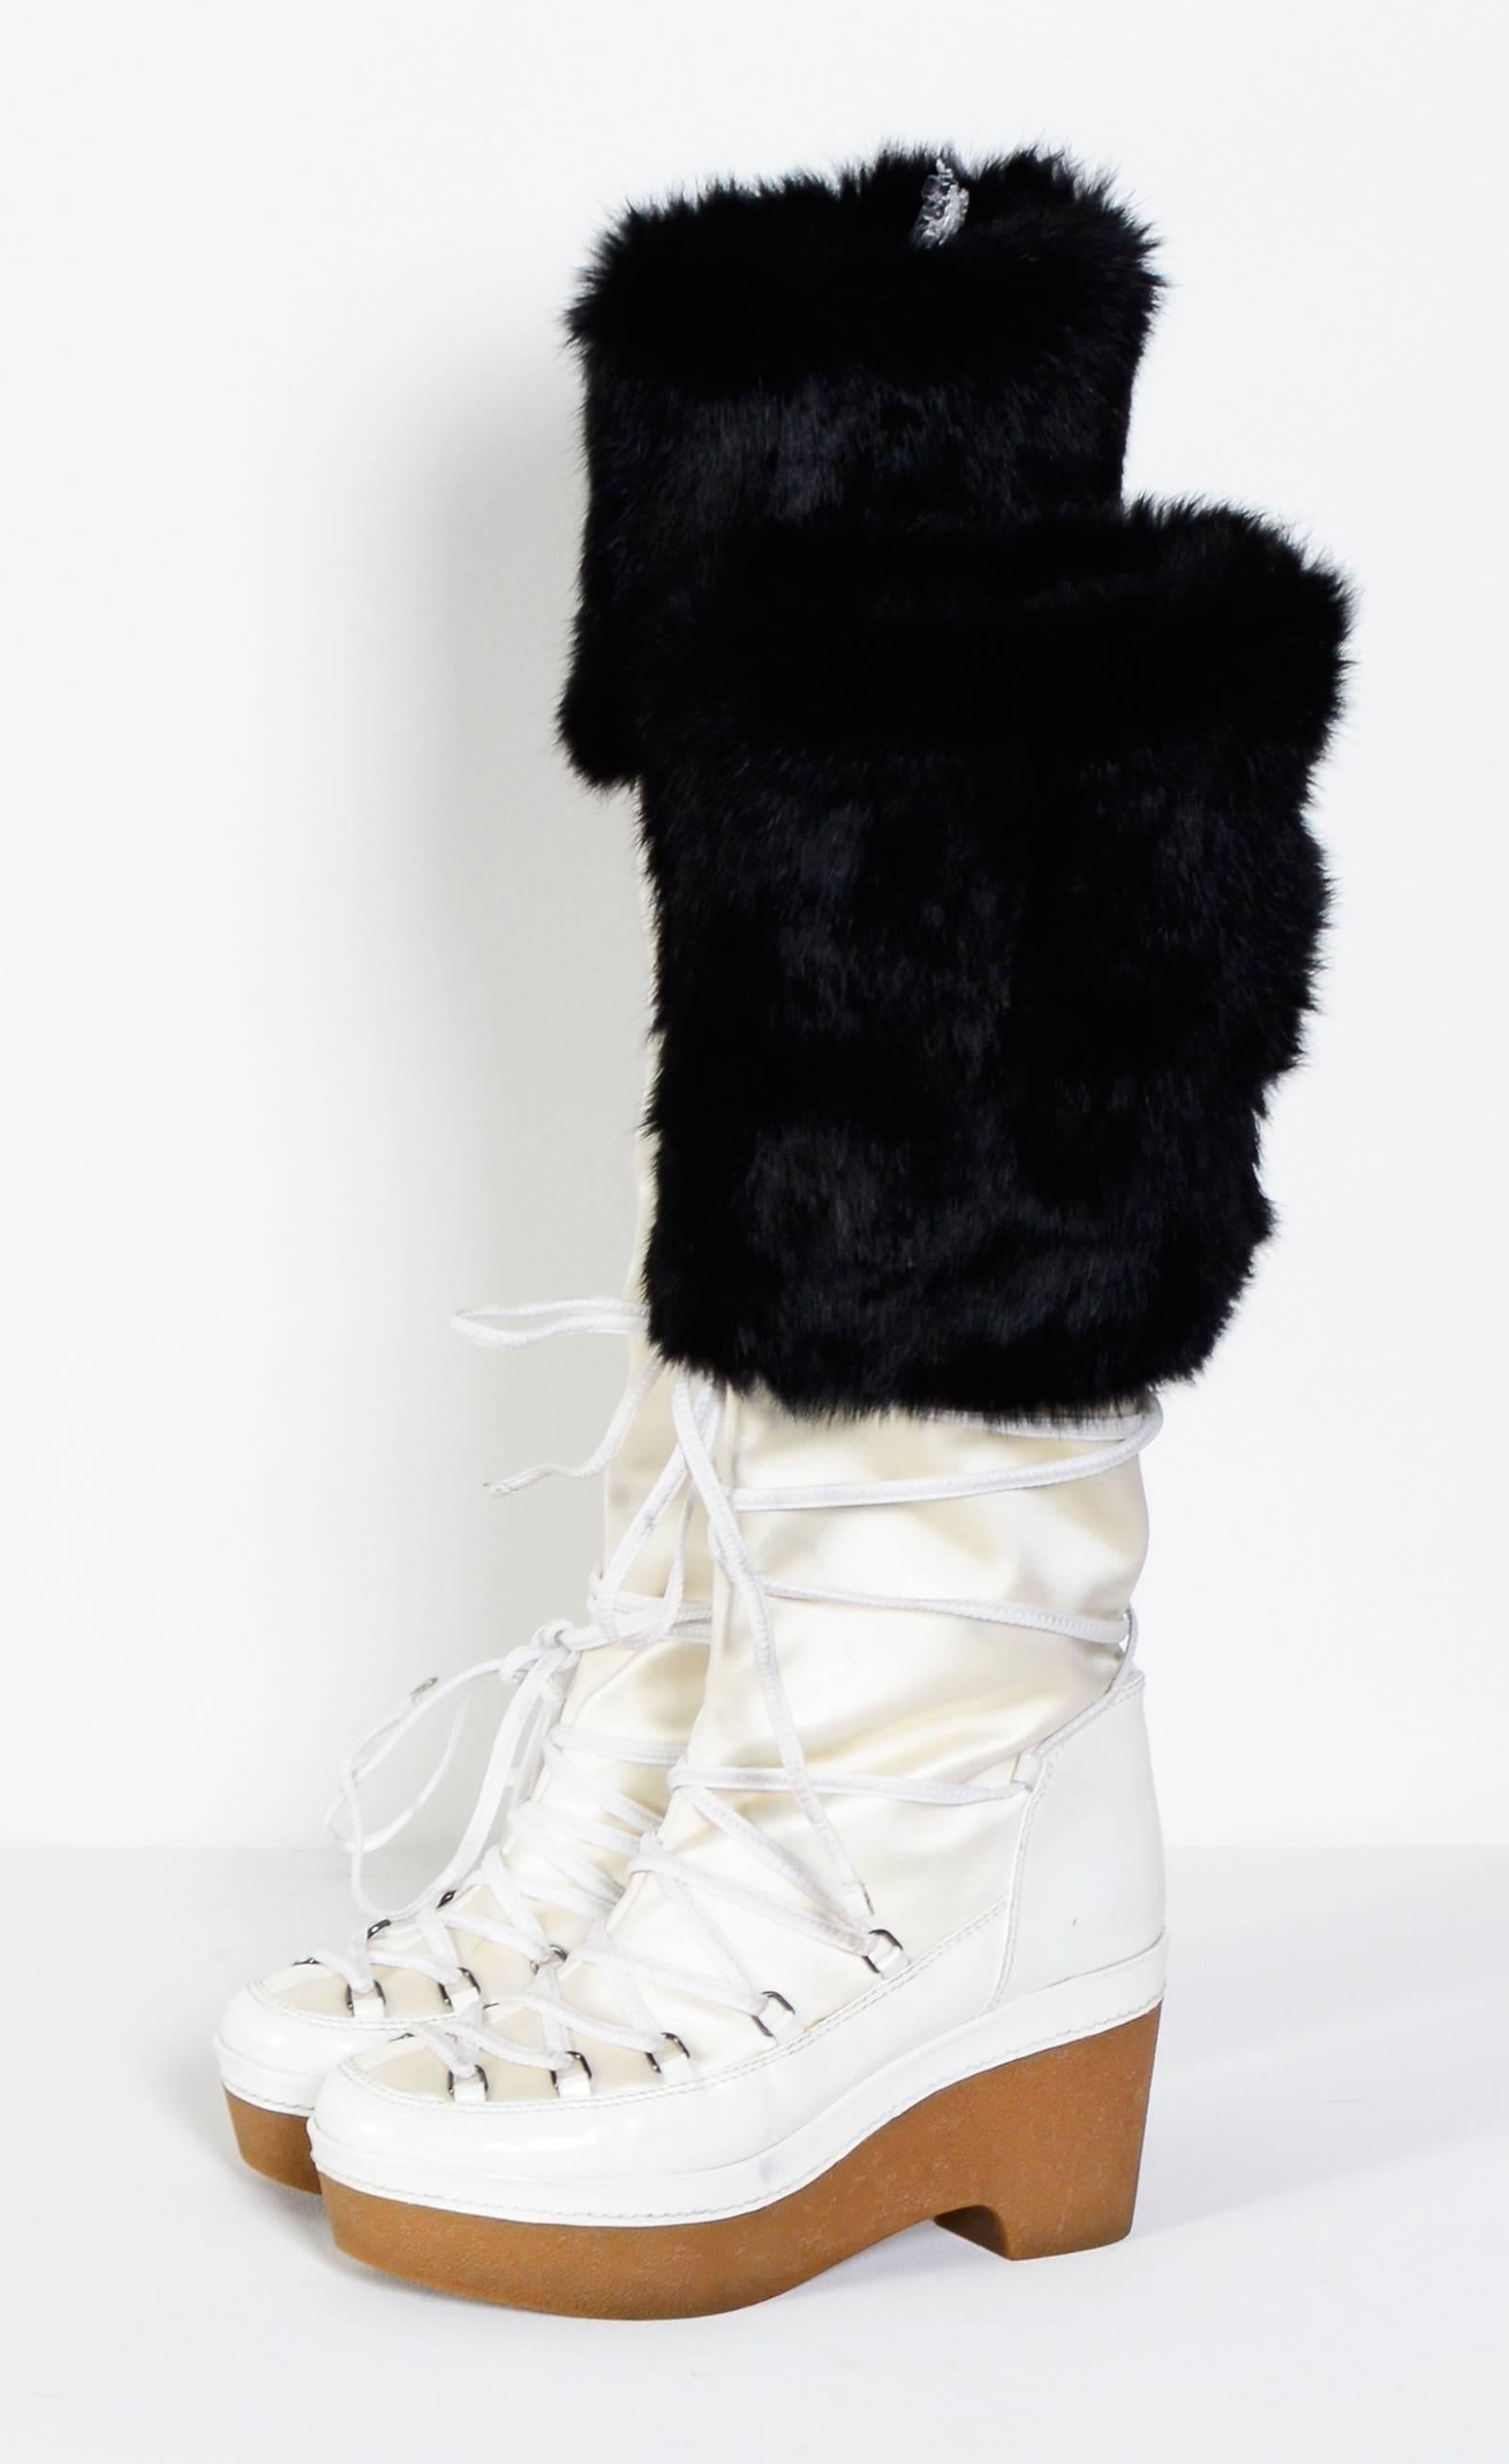 GIVENCHY / Alexander McQueen White & Black Snow-Boots 2